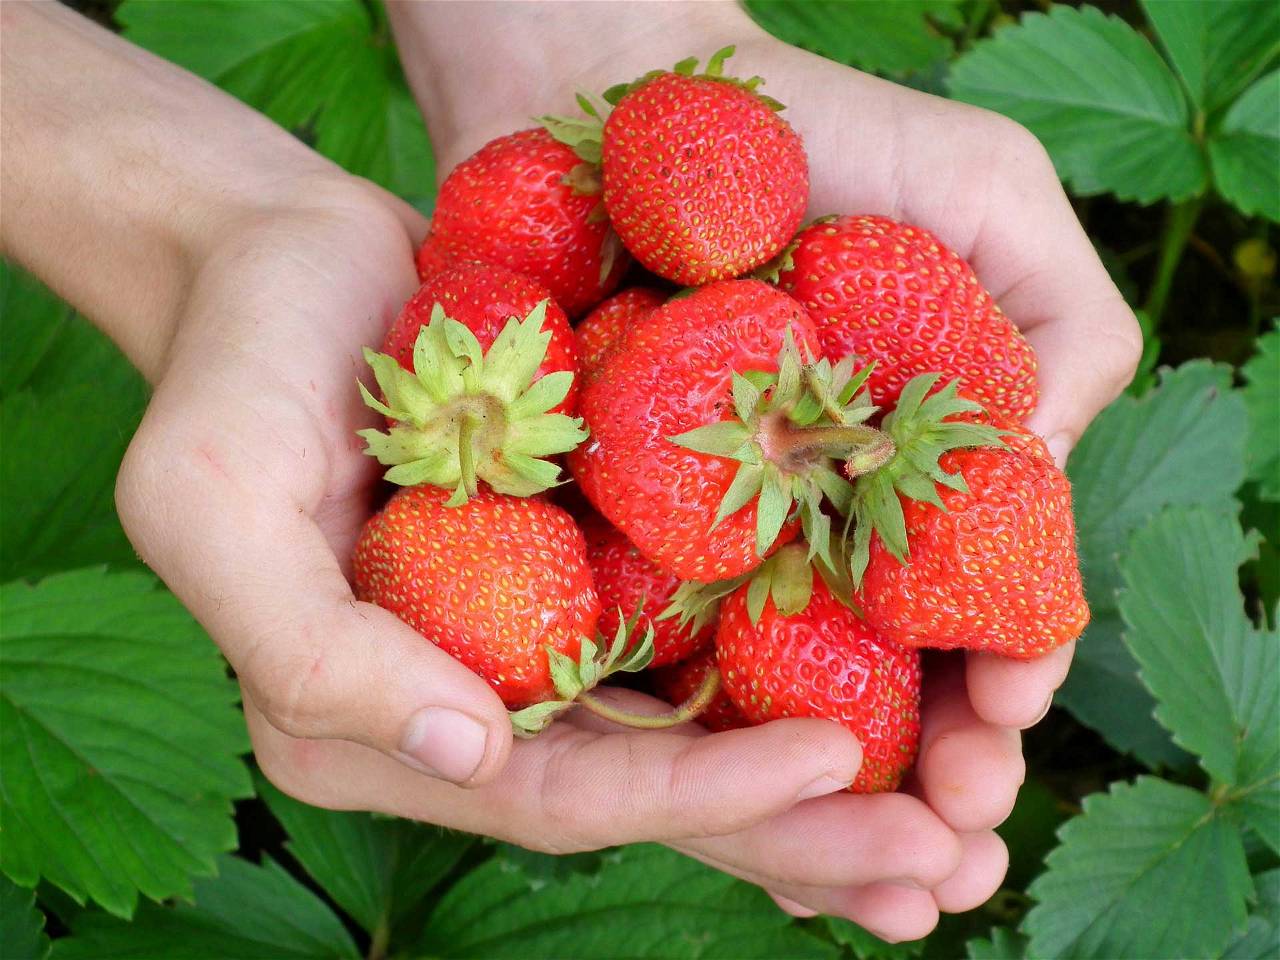 Strawberry Cultivation is the new trend among the farmers of Bihar